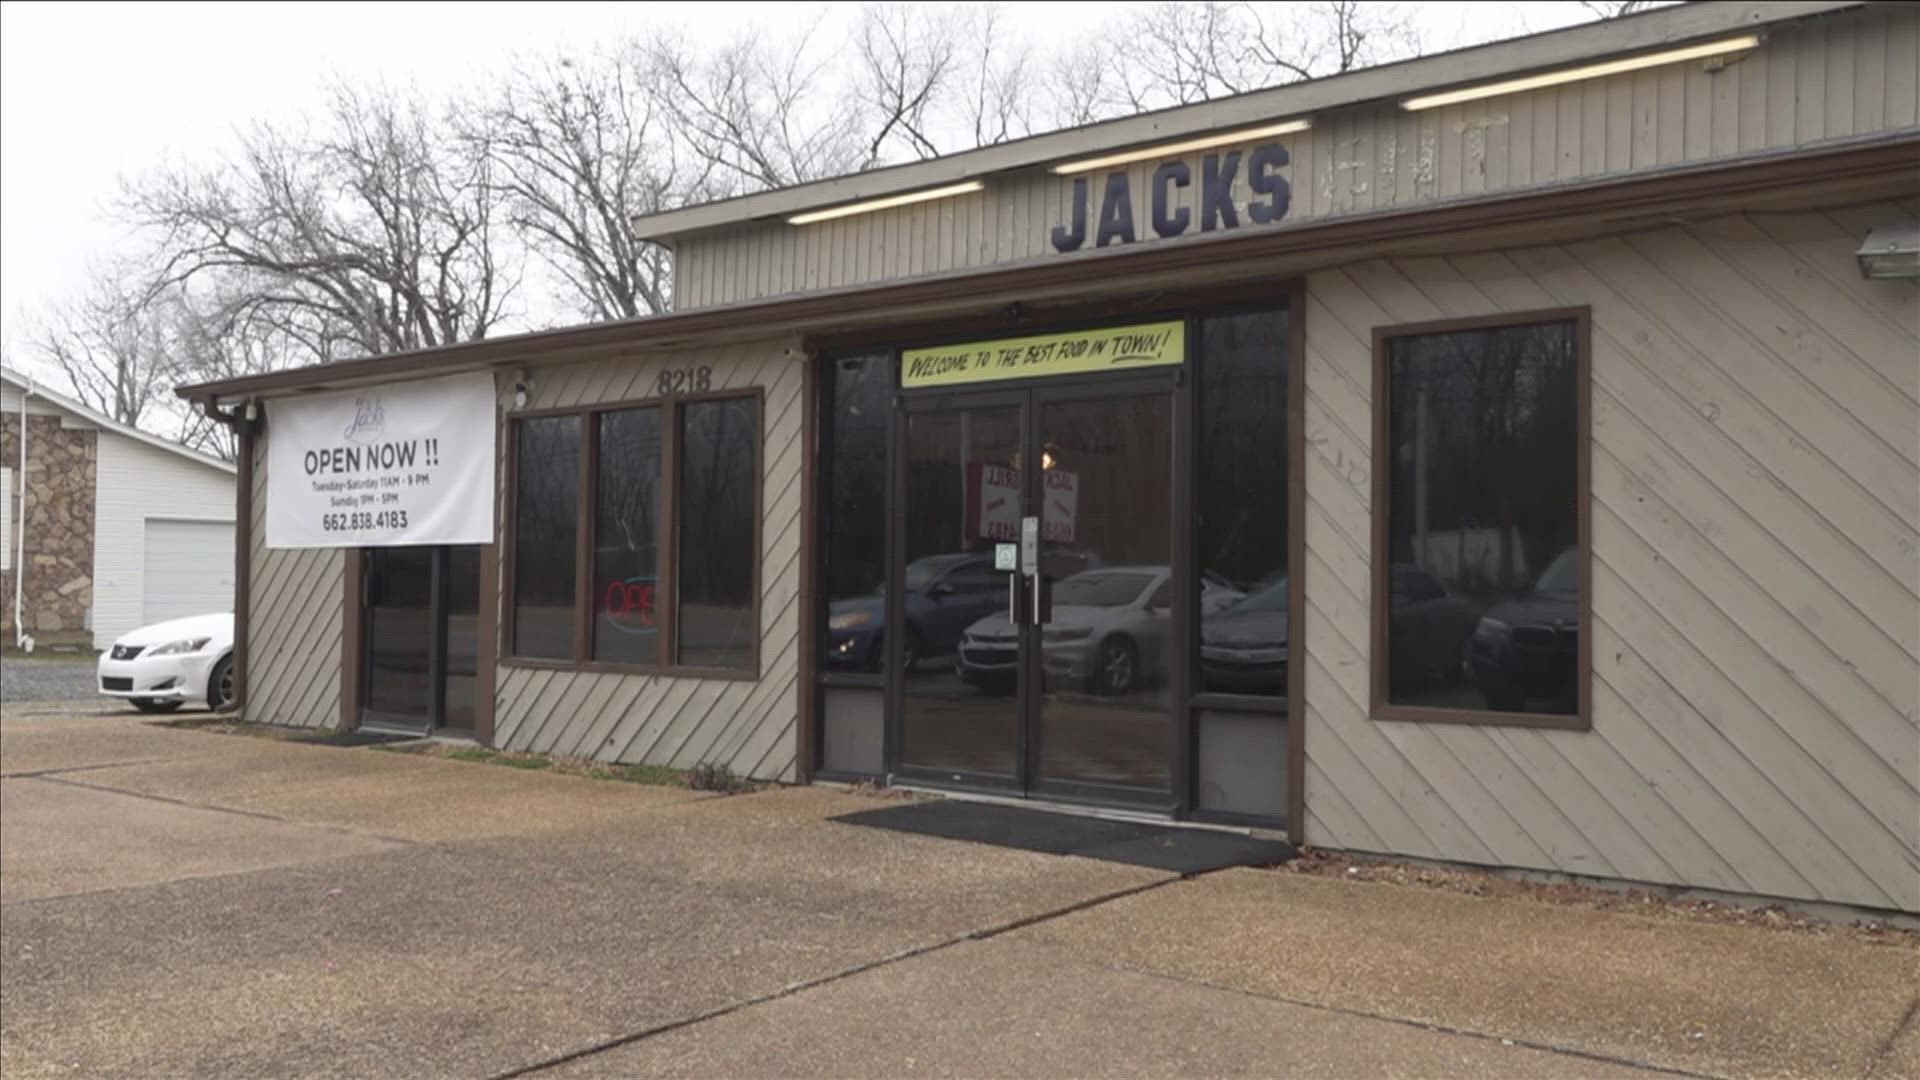 Erica Tunstall, the owner of Jack’s Grill in Byhalia Mississippi, said she was lucky to not have lost power when neighboring businesses did.